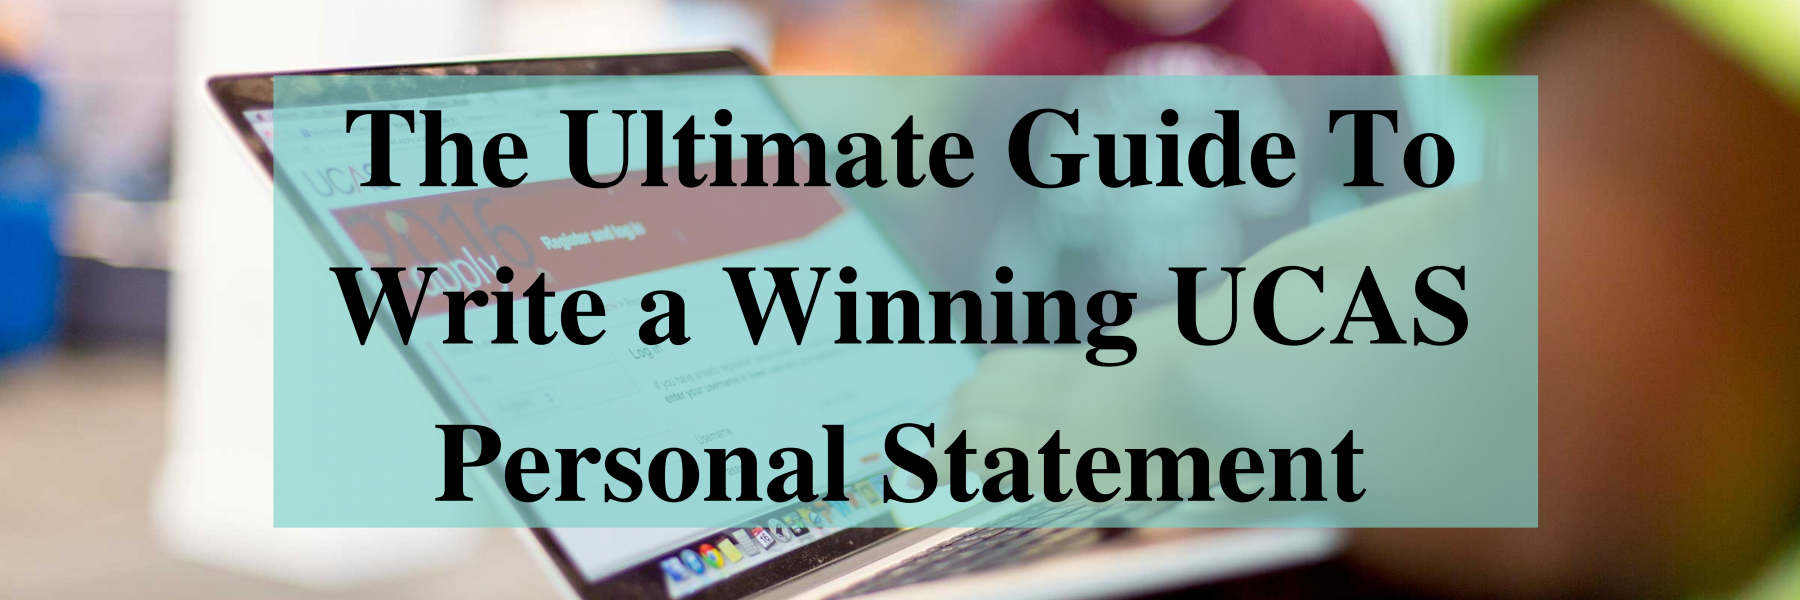 The ultimate guide to write a winning UCAS personal statement